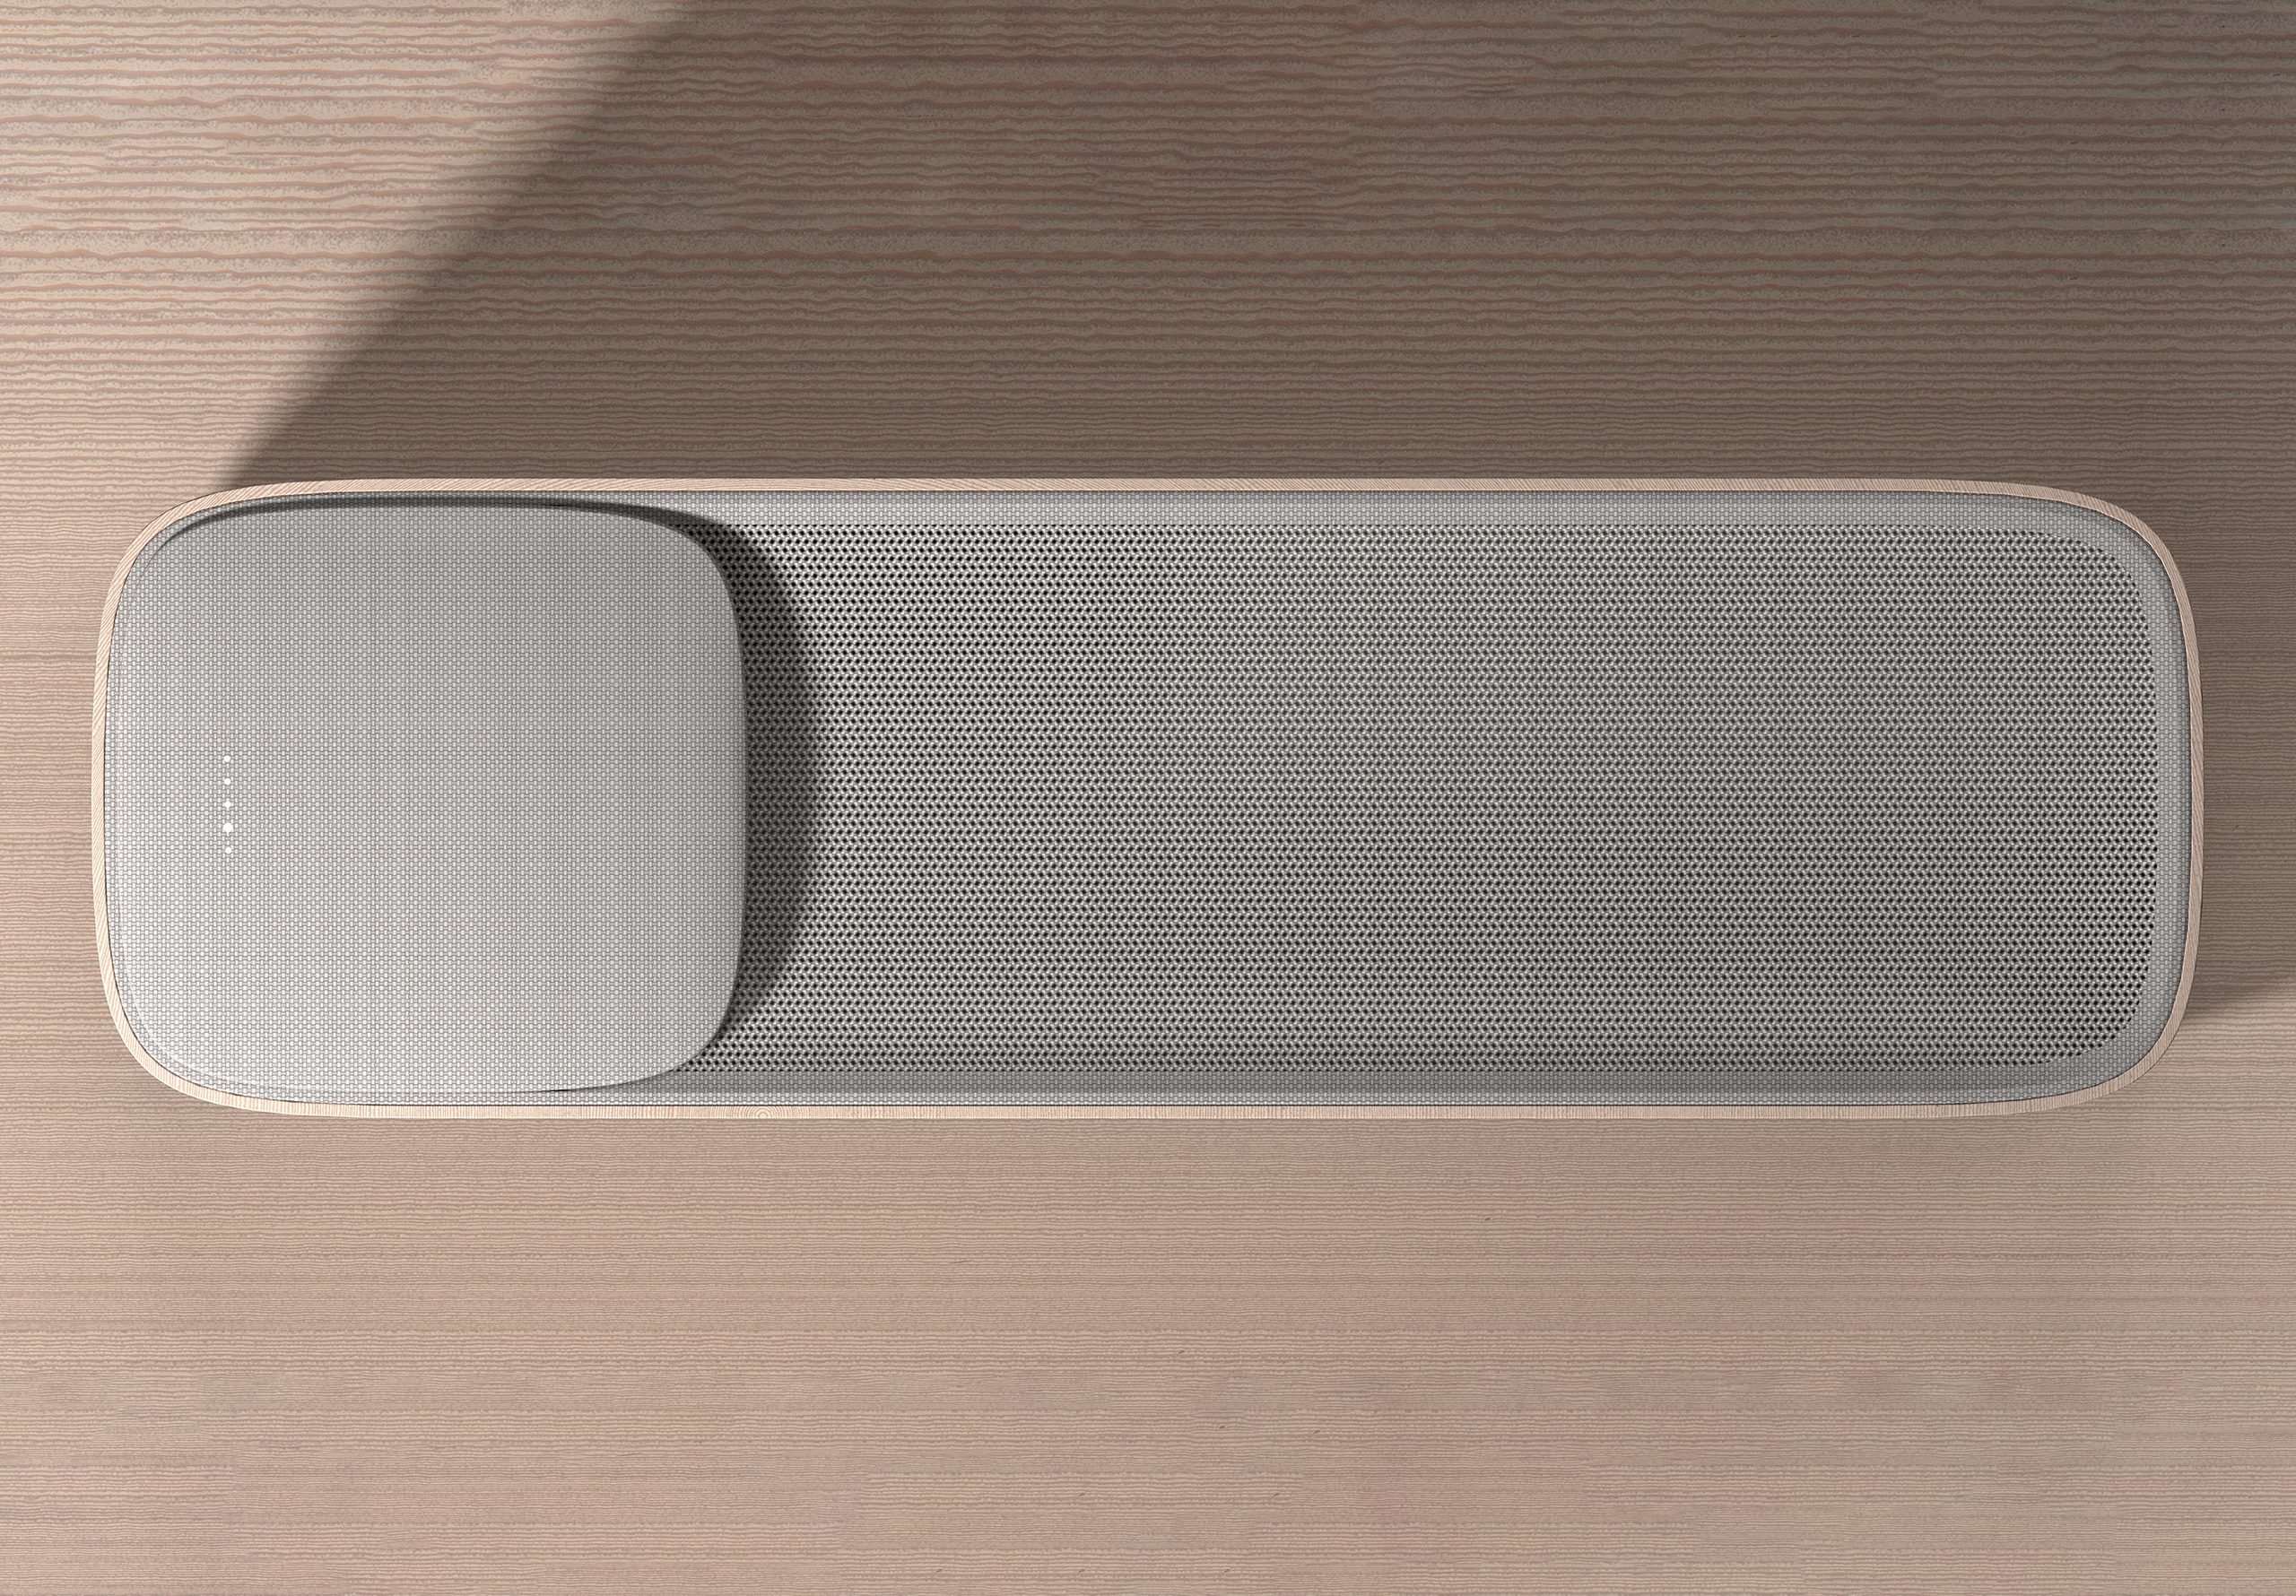 Aalto air purifier by Rodd design. Plan view render set on a timber floor.